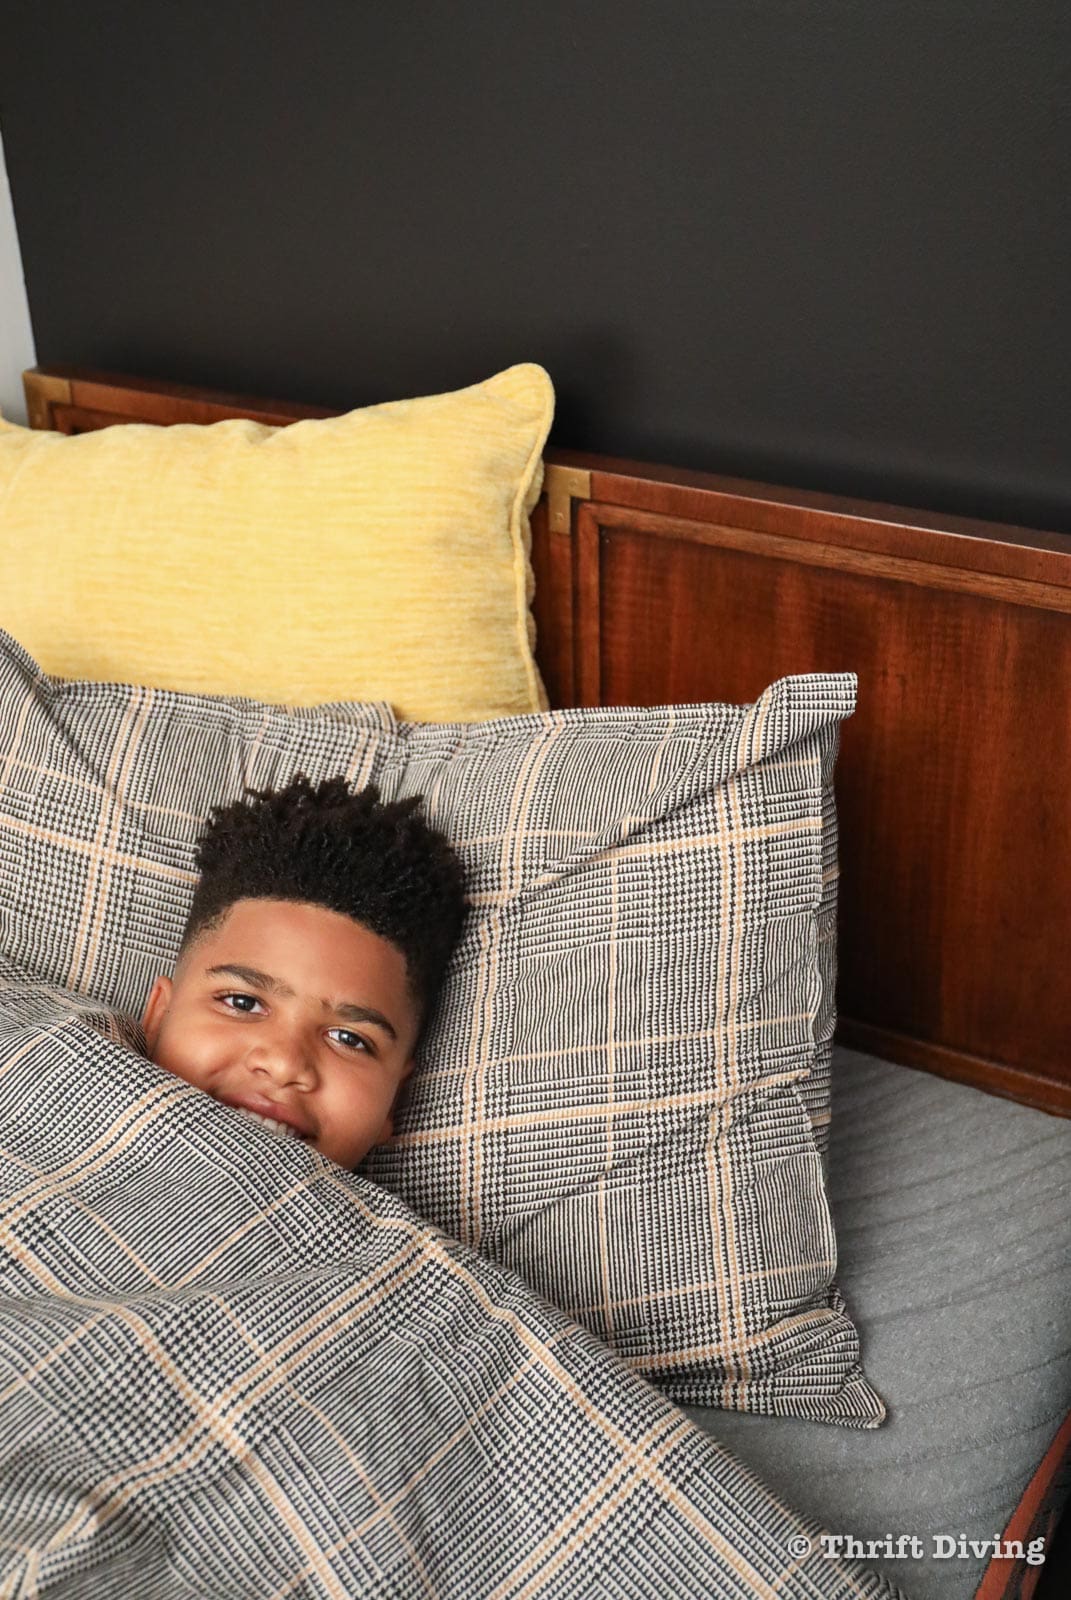 How to Build a Bed Using Vintage Headboards From the Thrift Store - Son enjoying new bed. - Thrift Diving